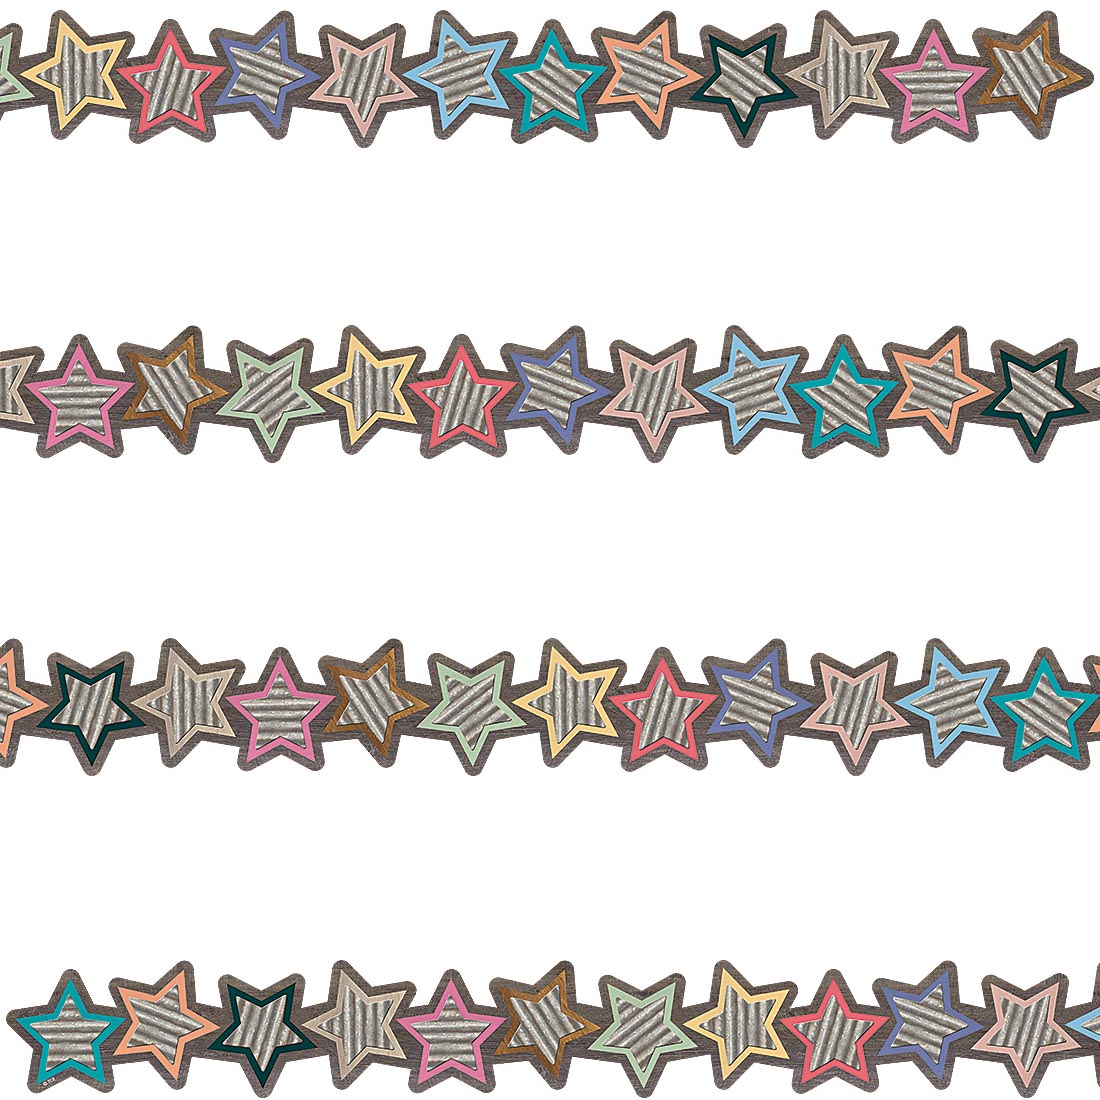 Stars Die-Cut Border Trim from the Home Sweet Classroom collection by Teacher Created Resources